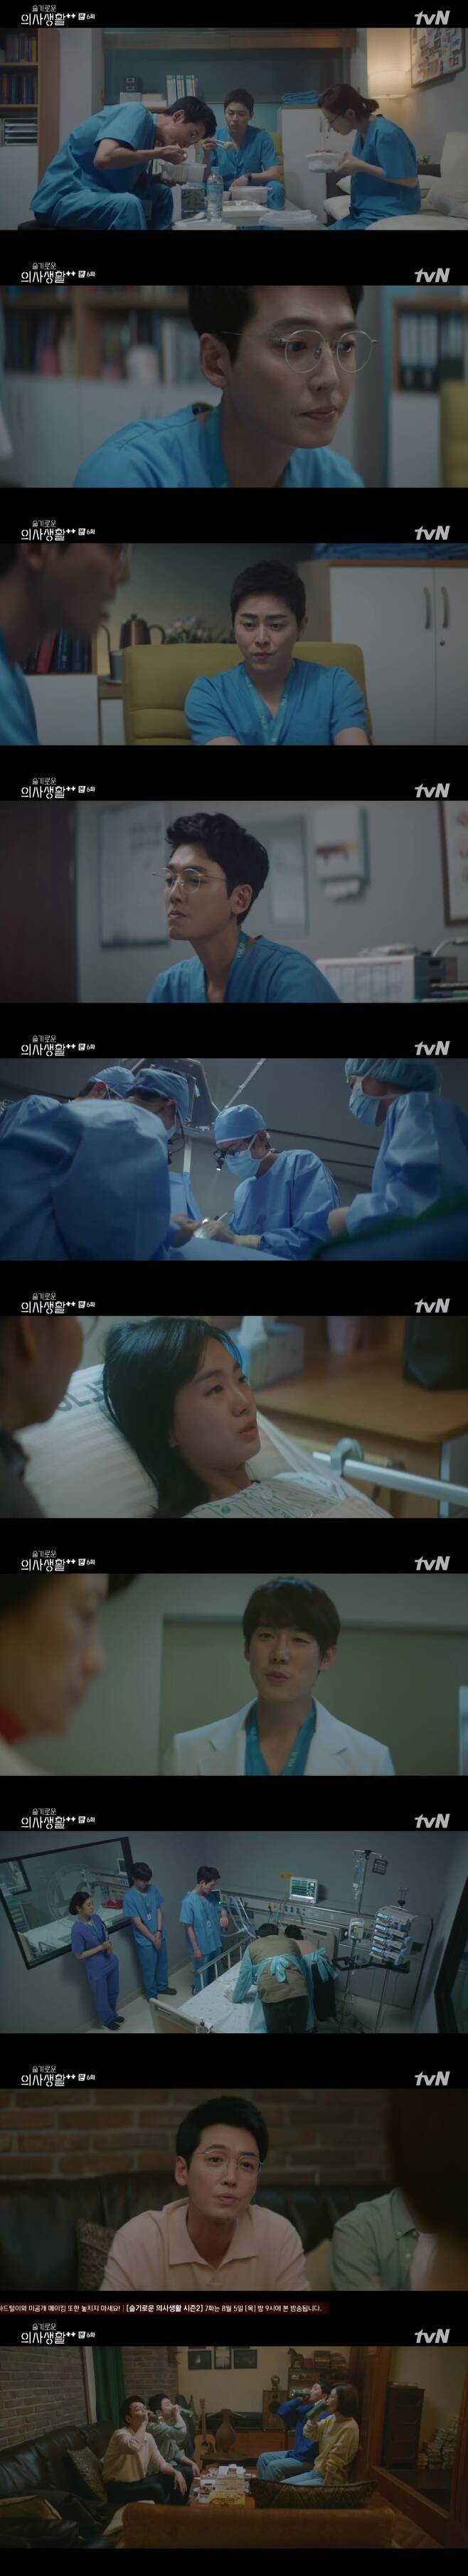 Seoul = = Sweetness 2 Jung Kyung-ho still misses former GFriend Kwak Sun-YoungIn the TVN Thursday drama Spicy Doctor Life Season 2 (Spicy of Slim Life 2), which was broadcast on the afternoon of the 22nd, a picture of Yulje Hospital was drawn a year later.Lee Ik-jun (Jo Jung-suk) became disturbed by Kim Joon-wan (Jung Kyung-ho)s failure to forget Lee Ik-sun (Kwak Sun-Young).When Kim Joon-wan was not on duty on the day, Lee said, Why do not you go home? Kim Joon-wan said, There is no one at home.Then you should love, too, let me have a blind date, said Chae Song-hwa, who listened to this, but Kim Joon-wan said, No, I dont.Im not seeing anyone, he said.Kim Joon-wan said, I still have not forgotten the GFriend that I broke up. I still remember every day.Why do not you forget it? Lee said, I know all the facts, and Lee said, Why do you ask me that? An Jeong-won (the soft-stone) performed surgery on a neonatal patient with esophageal obstruction; mother-in-law of the mother before the surgery shouted at Son, I have to find out everything before marriage.Ahn Jung-won asked his junior, Is that mother-in-law now?An Jeong-won went on to find her mother after finishing surgery very well. It was a rough operation, but the baby held on very well. It ended well, as we had planned.Youre my mother, arent you? he deliberately asked, directed at the mother-in-law of the mother.Its not your daughters fault, this is not something that happened because someone did something wrong, it just happened.If you think about the genetic reasons, it will be half of your father and half of your mother, but you do not know that. We are not so rare.She was like a daughter, so she told me to grow up for a few more days. Praise me.Mother-in-law was belatedly sorry, and the mother wept.The black history of 99s was also revealed on the day: Kim Joon-wans usual cool past was also known: I went to the bathroom after a death sentence and cried a lot, and I was born and cried the most that day.I tell my father that he loves my dead father, and that he will be born in the next world. I still have that image. I can not forget it forever.Kim Joon-wan continued: I regret crying in the bathroom then, I can see tears in front of my guardians, what a disgrace it was in the bathroom.I think its more embarrassing if I think about it now. Yang Seok-hyung (Kim Dae-myung) said, I think its okay if I keep my line. Were not AI, right?, and all my friends sympathized.